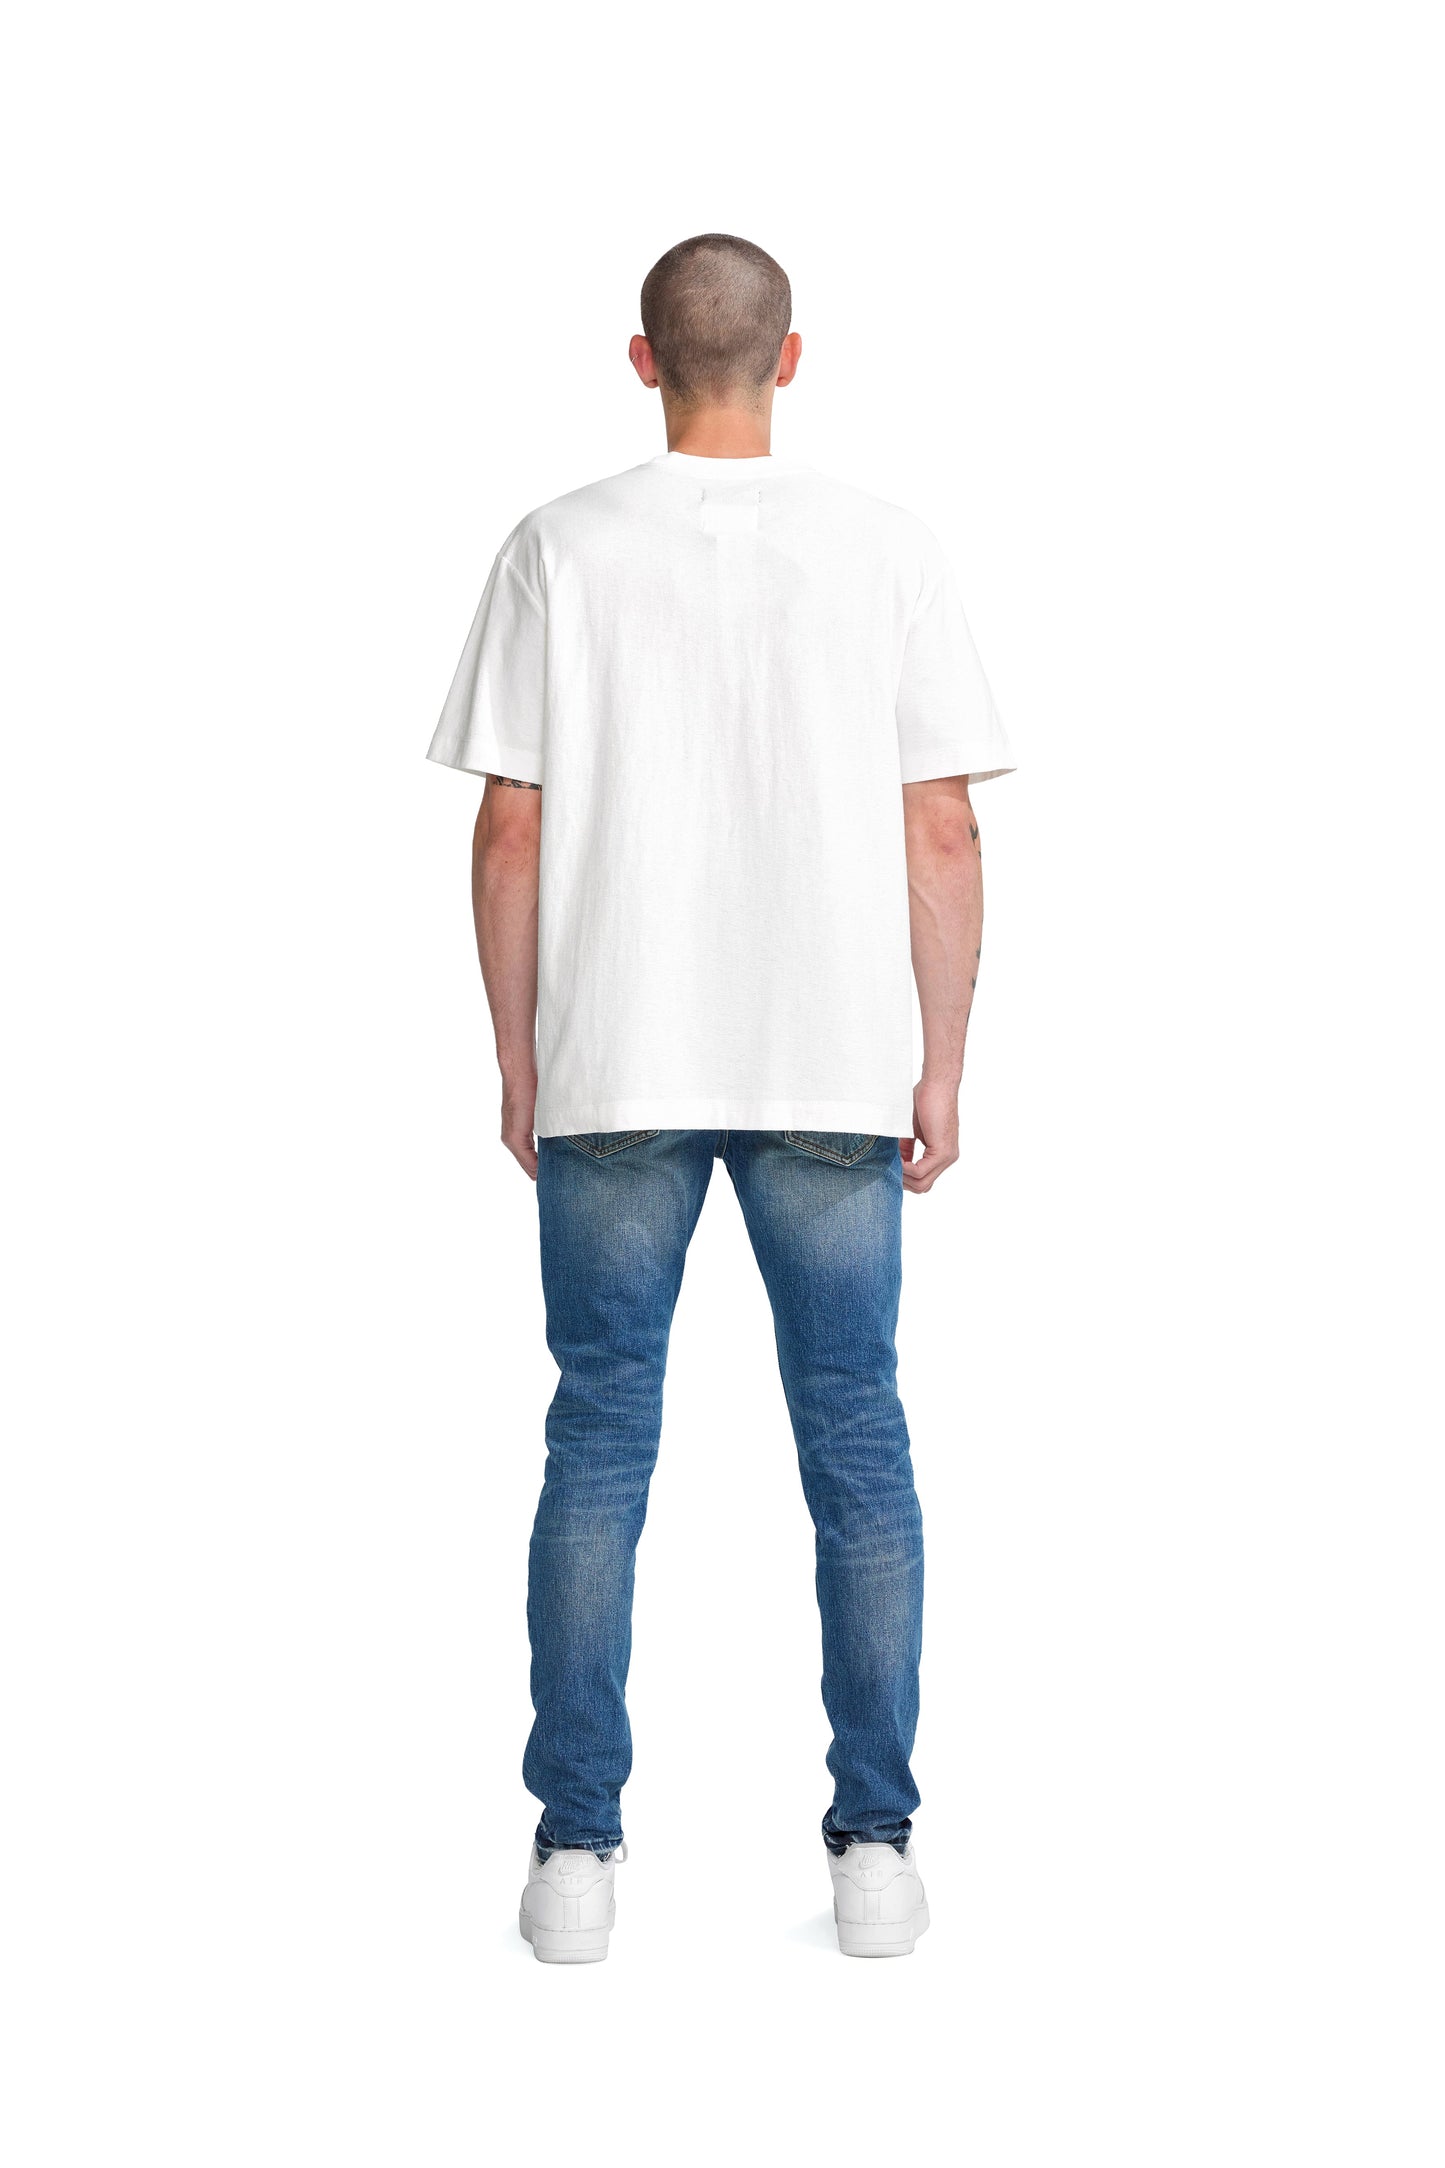 P104 REGULAR FIT T-SHIRT - Double Stripe in Coconut White